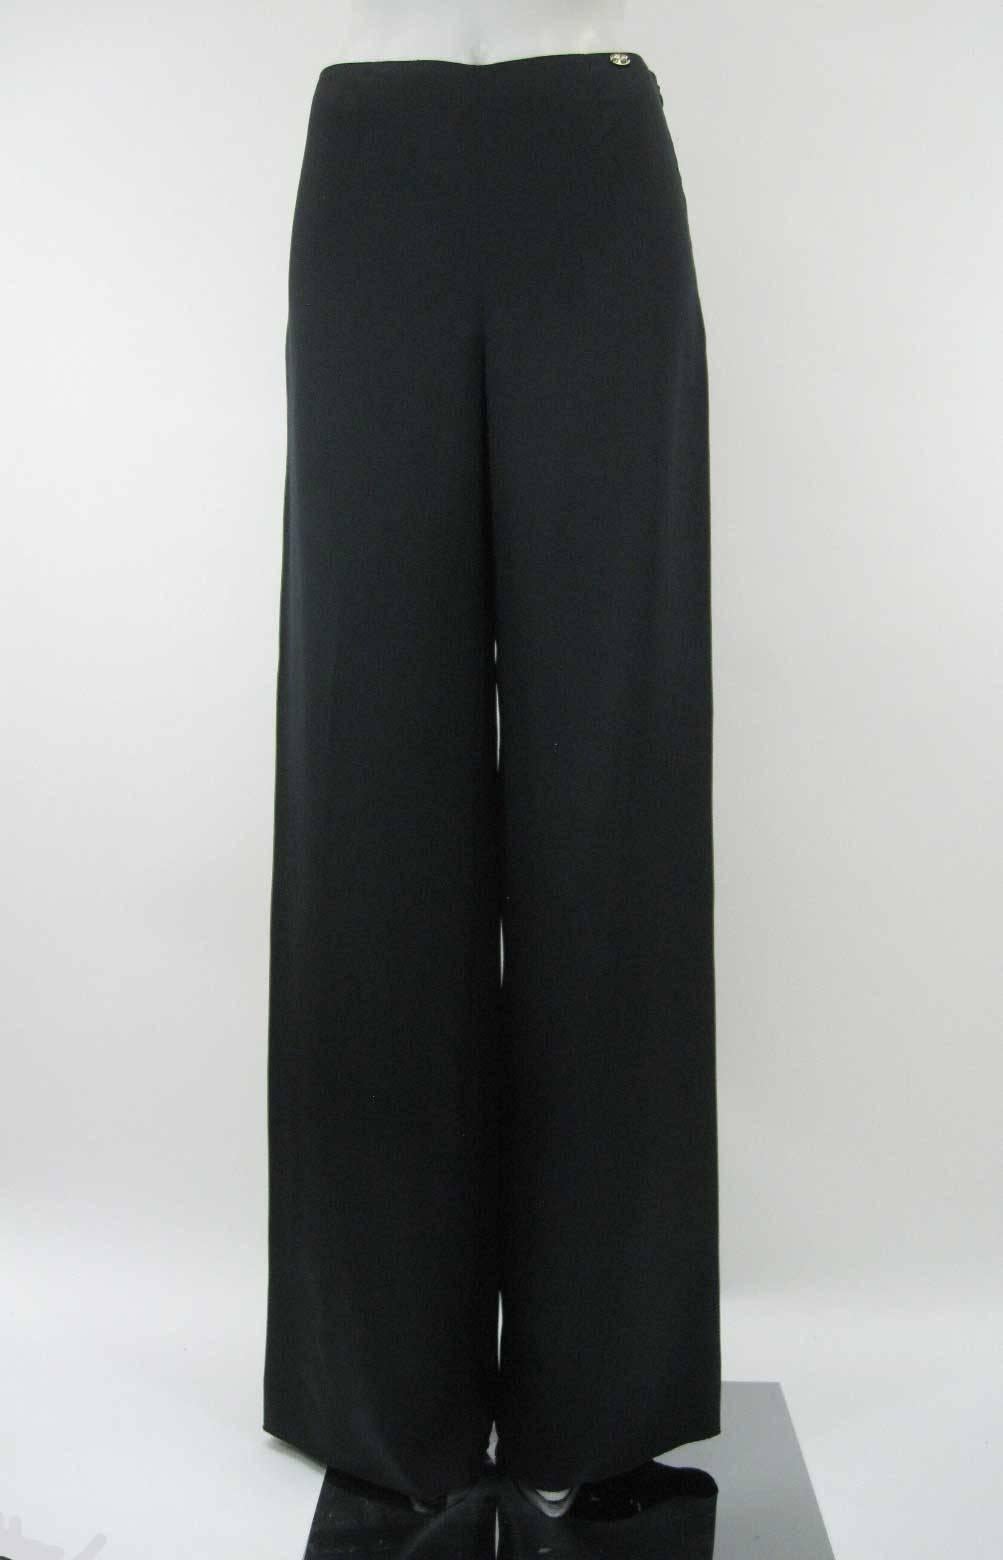 Elegant and classic black Chanel palazzo pants.

Luxurious silk satin fabric.

Mid rise with hidden side zipper.

Front and back darting.

Chanel name plate on left hip.

Fully lined.

Tagged a size 36.

This is in excellent pre-owned condition with